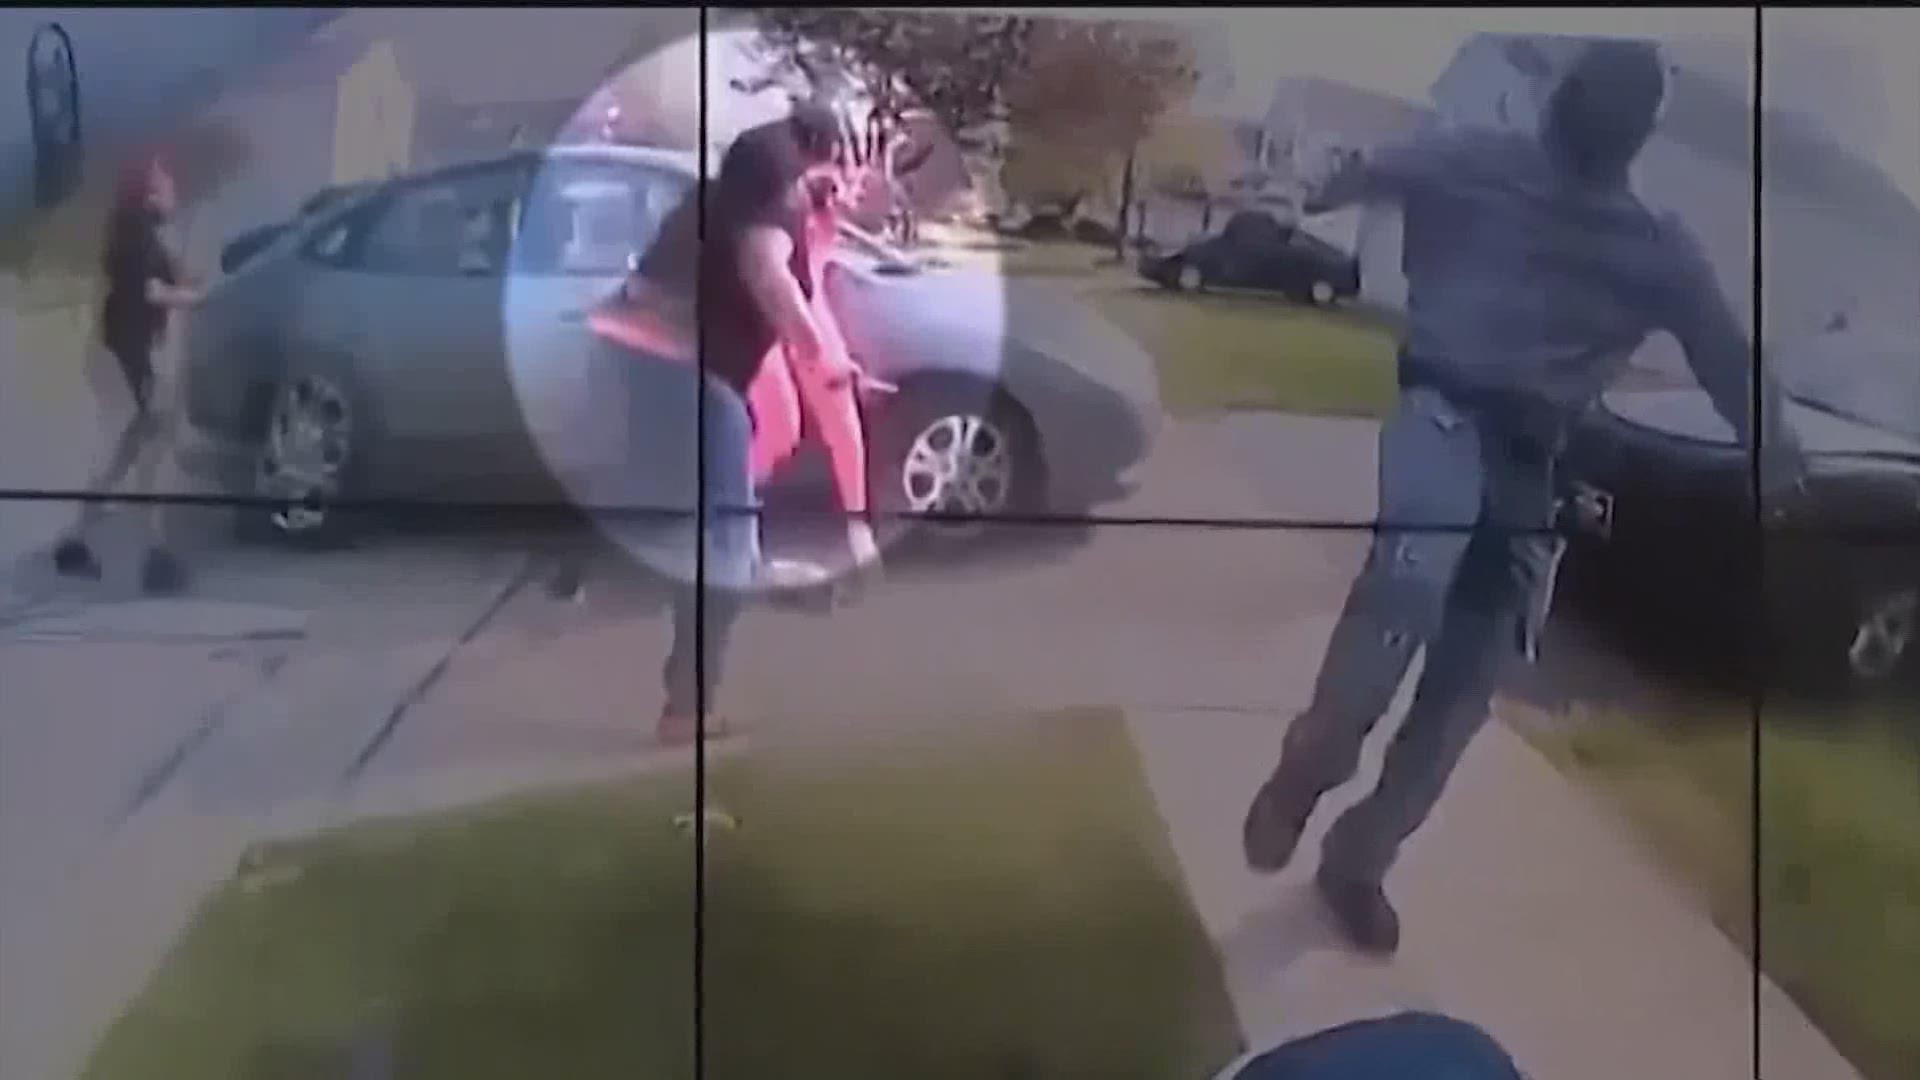 Body cam footage shows moments a 16-year-old Ohio teen was shot and killed by police.